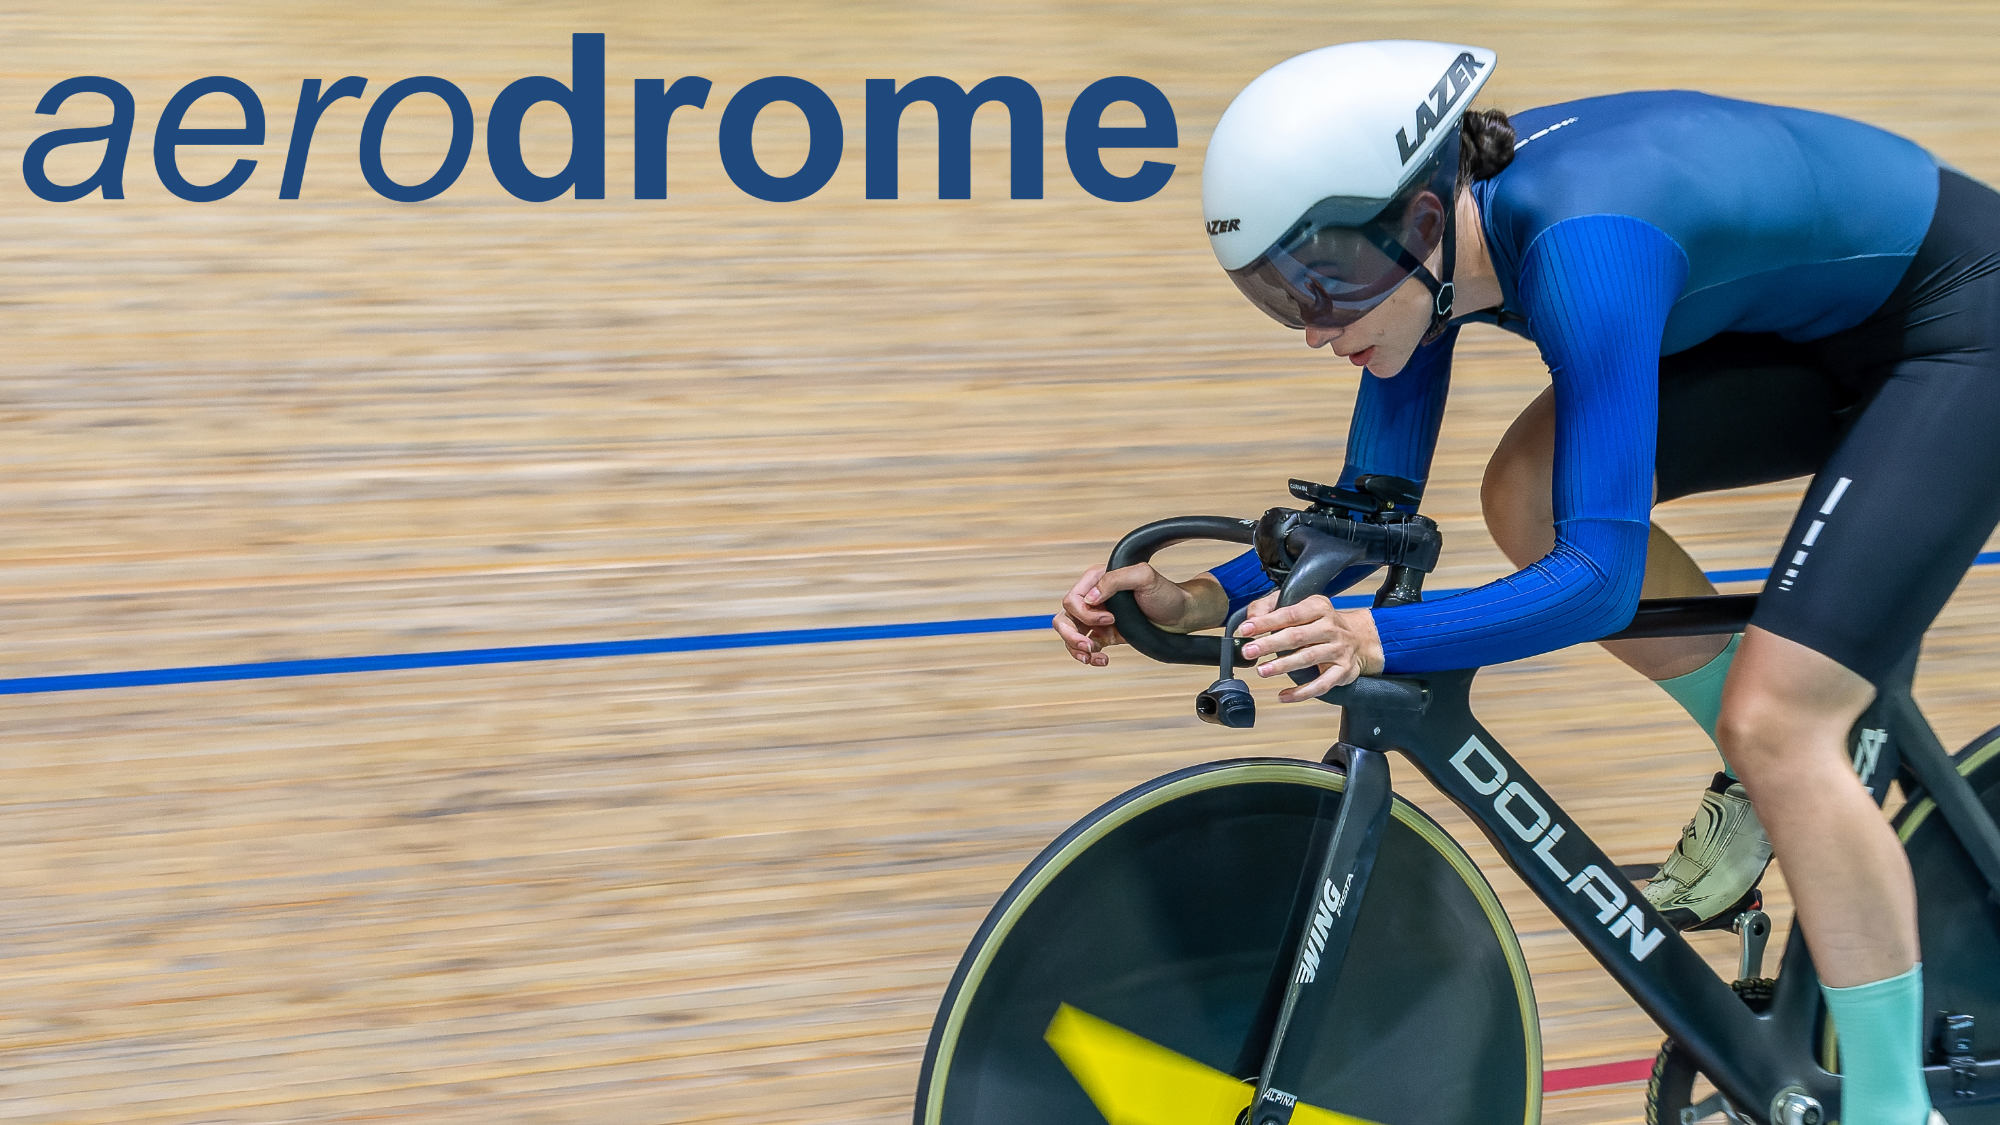 aerodrome cycling device promotional video cover photo